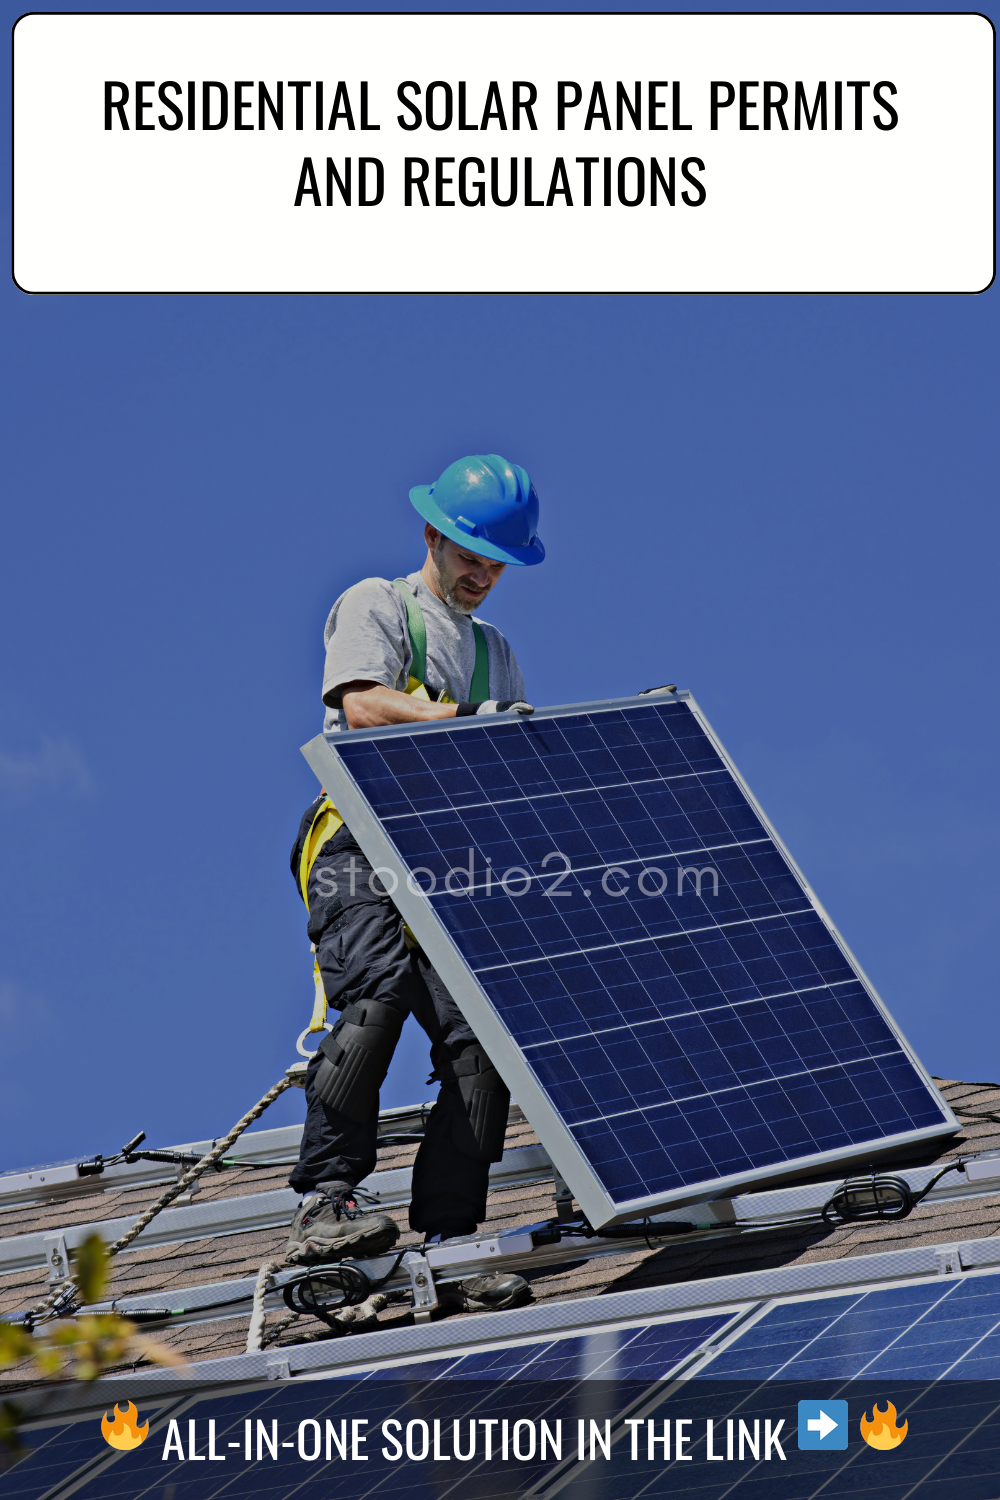 Residential Solar Panel Permits and Regulations